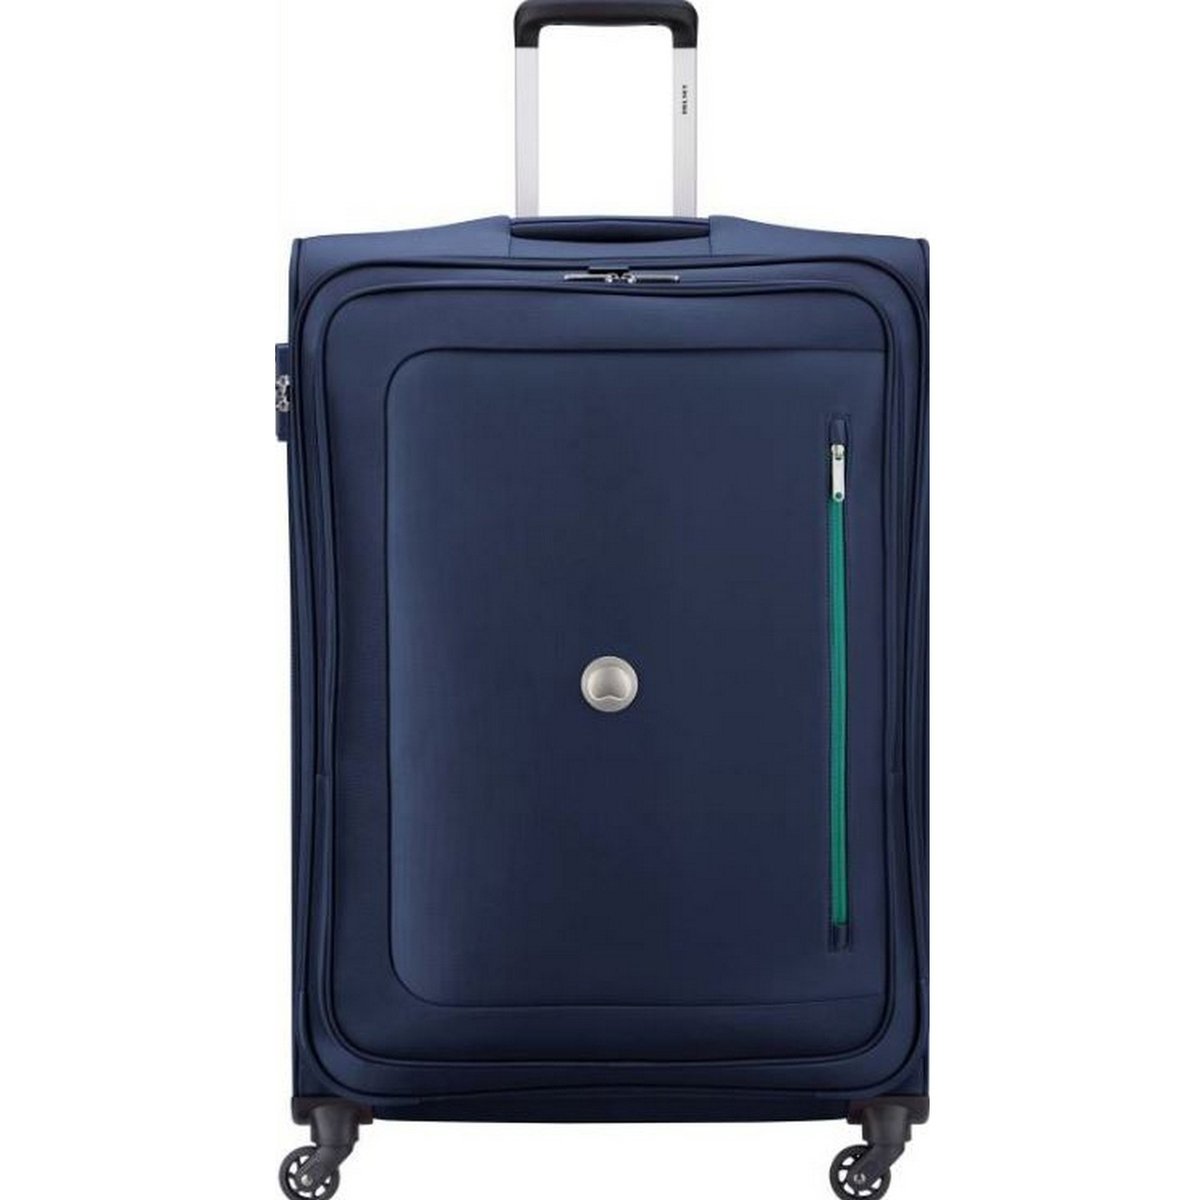 Delsey Oural 4 Wheel Soft Trolley 68cm Navy Blue